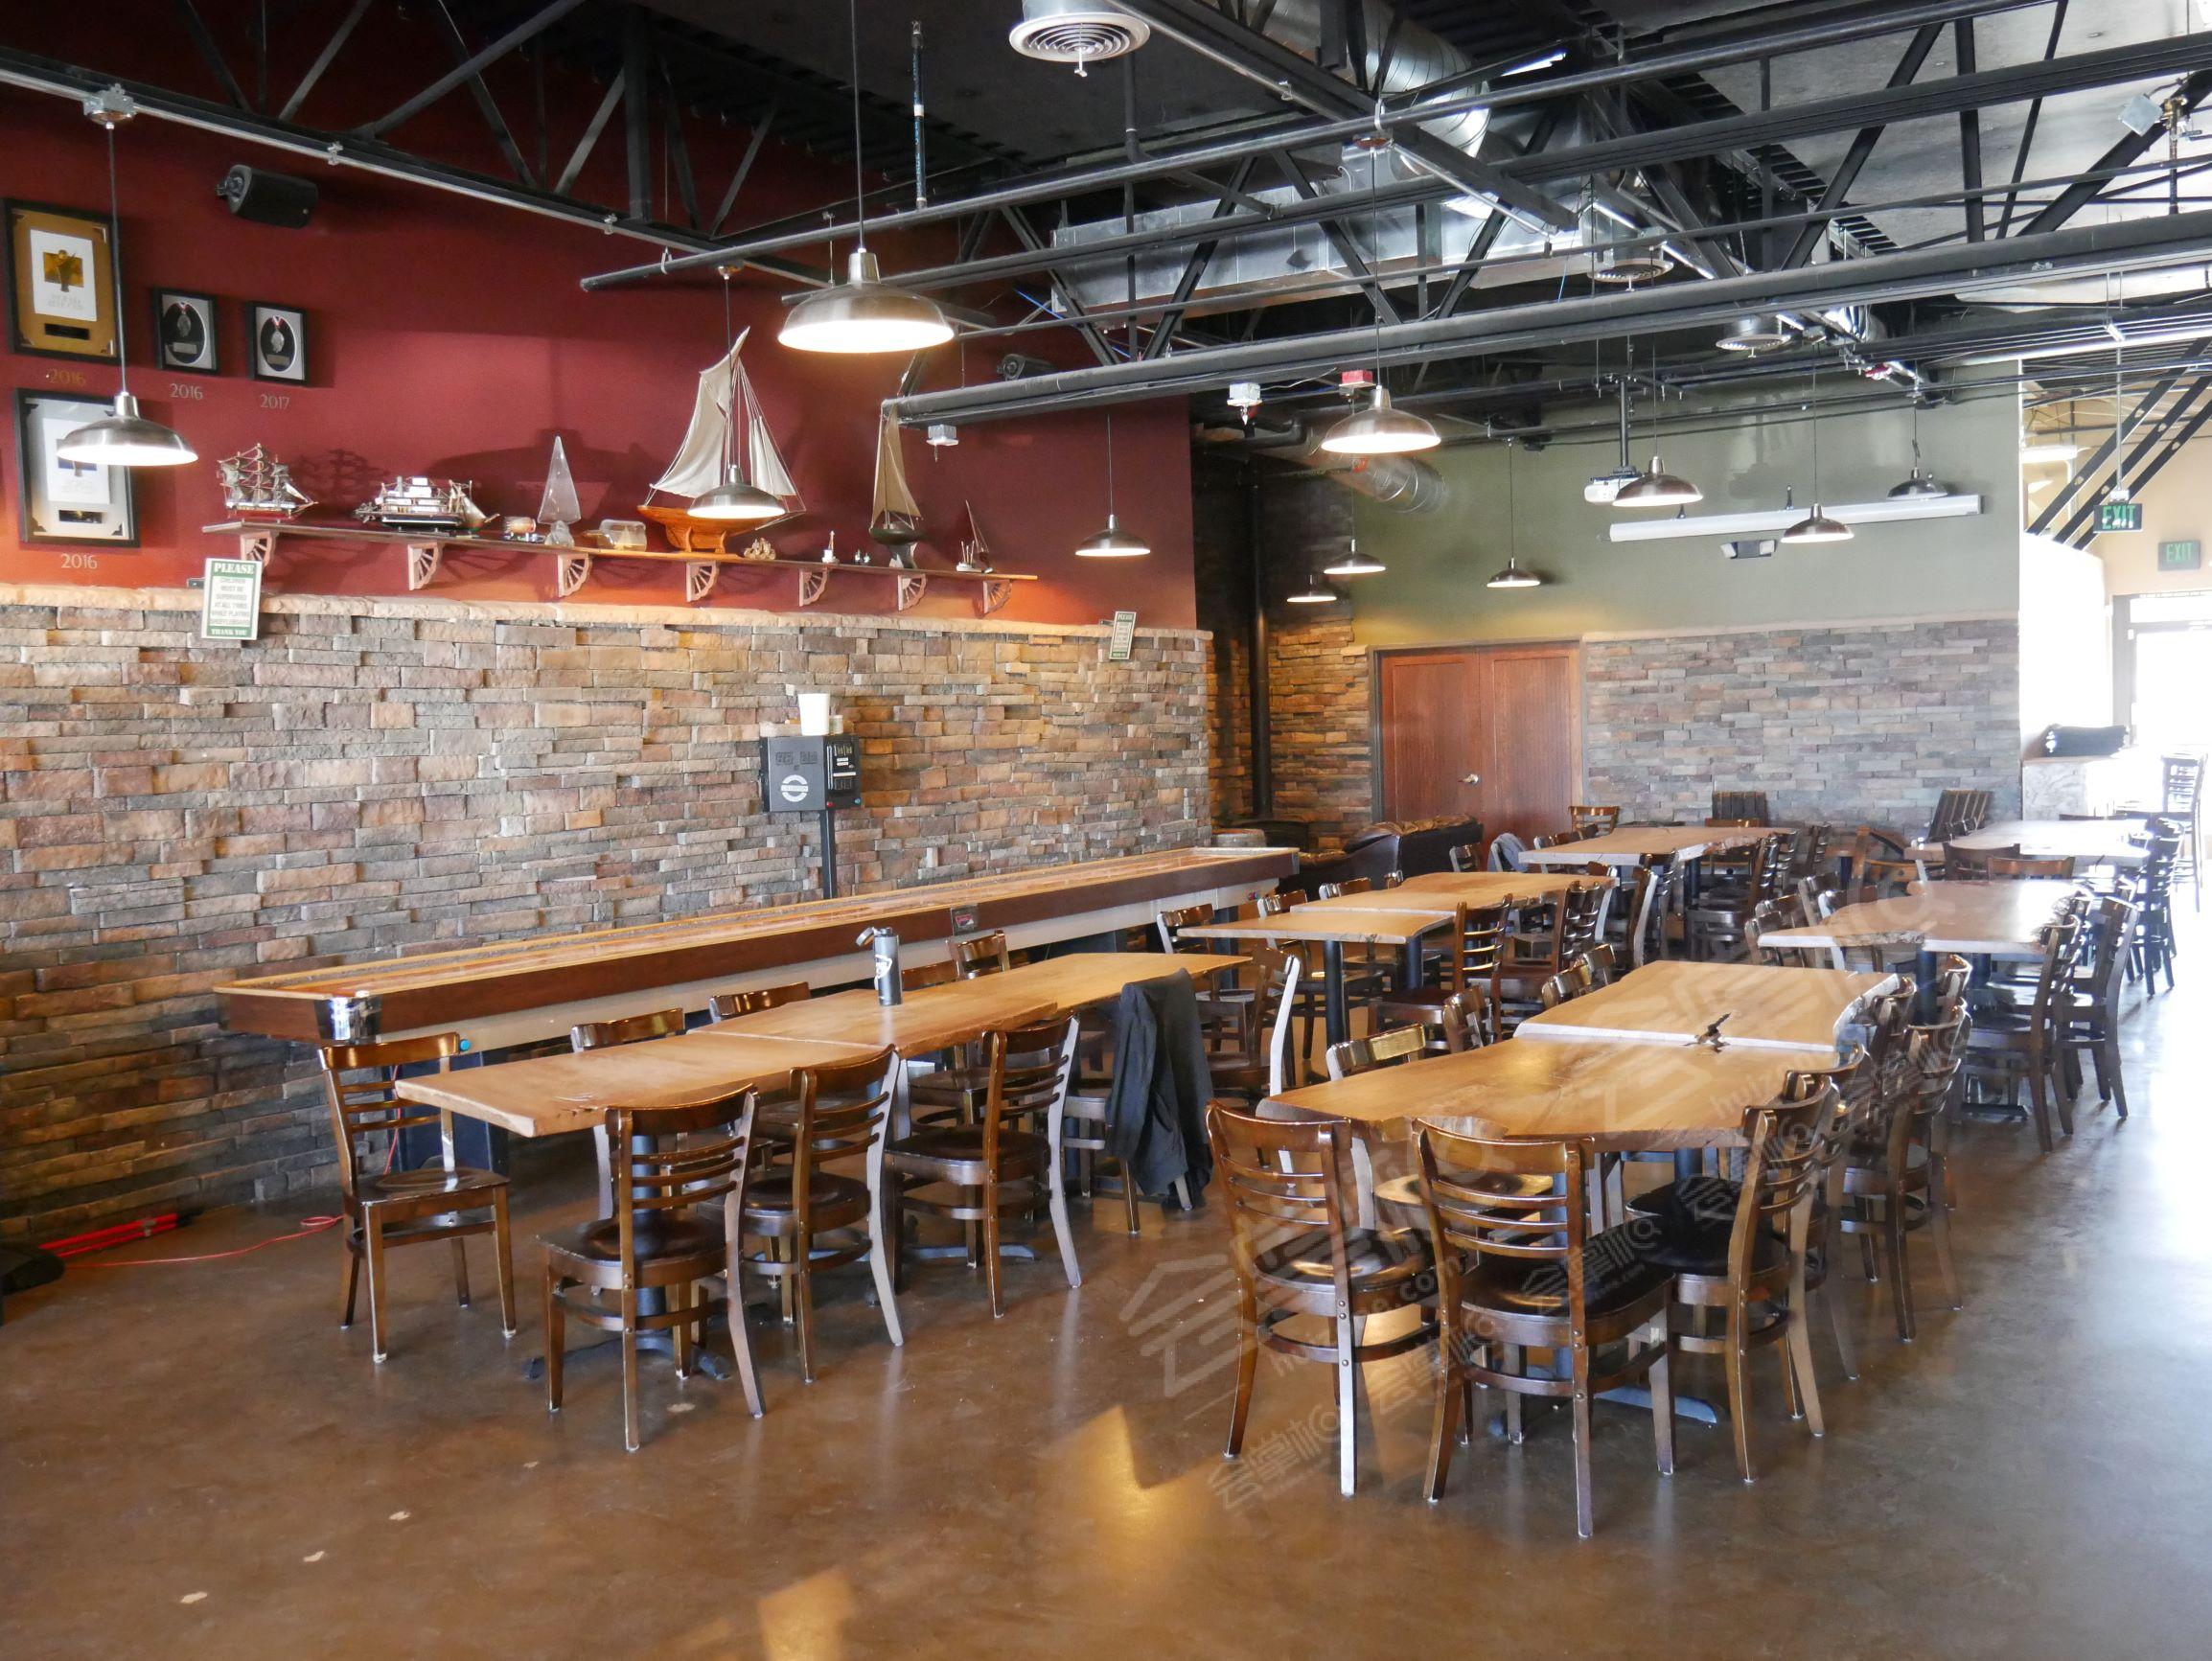 Barrel Room Event Space with Board Games & Shuffleboard